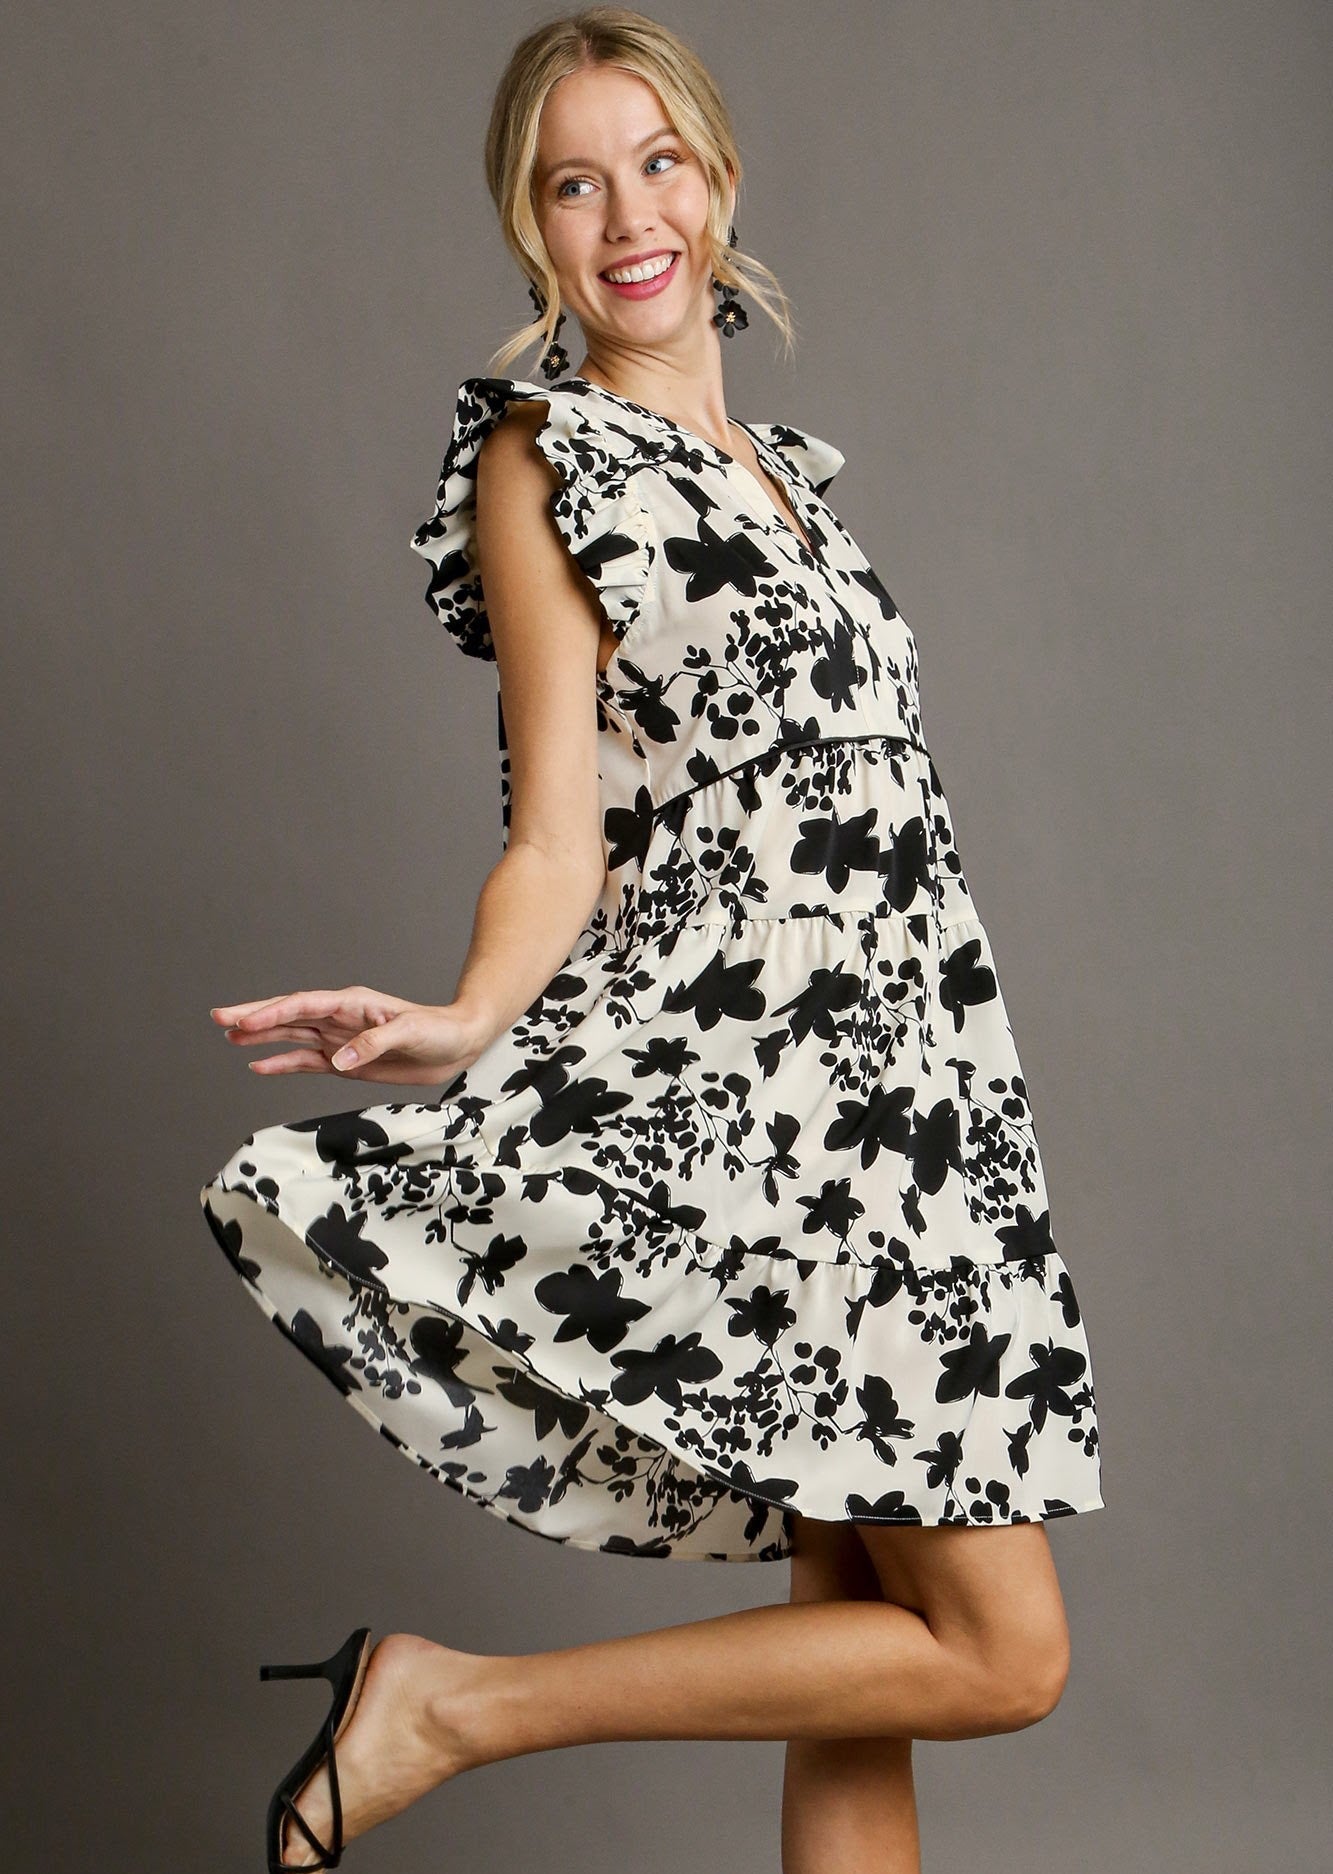 Fun And Floral Dress - Off White Mix